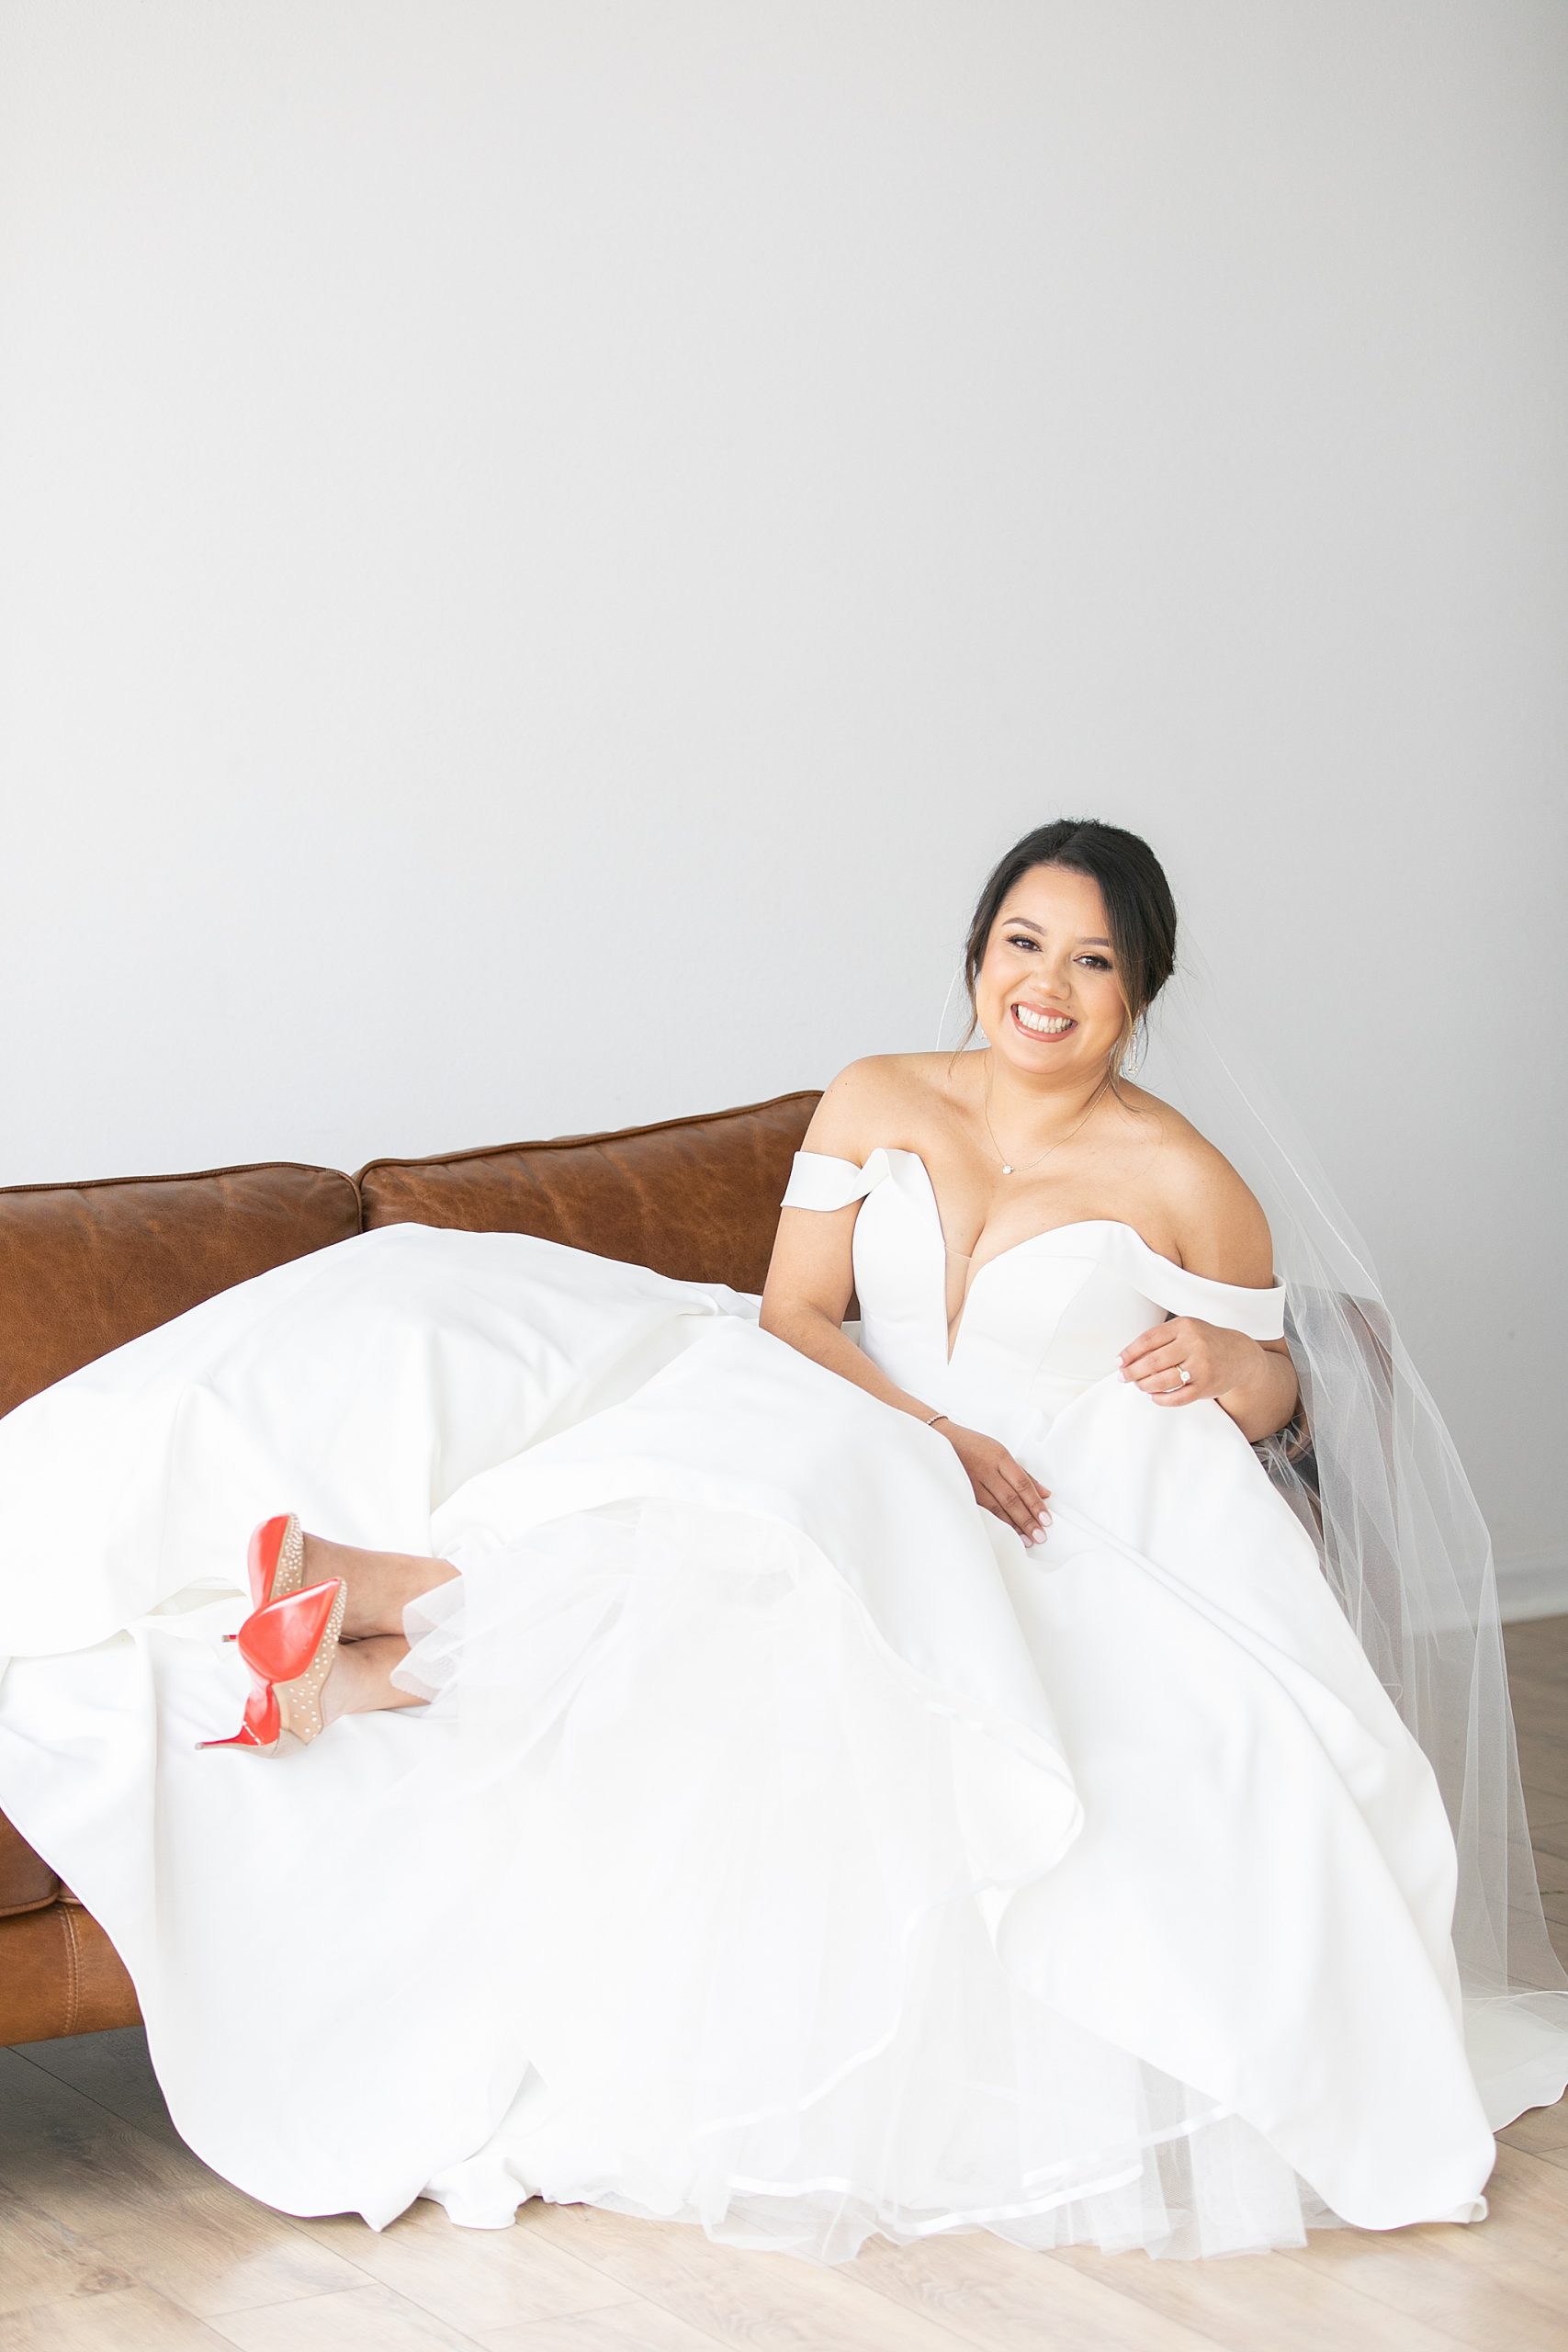 TX bride sits on couch in wedding dress with veil